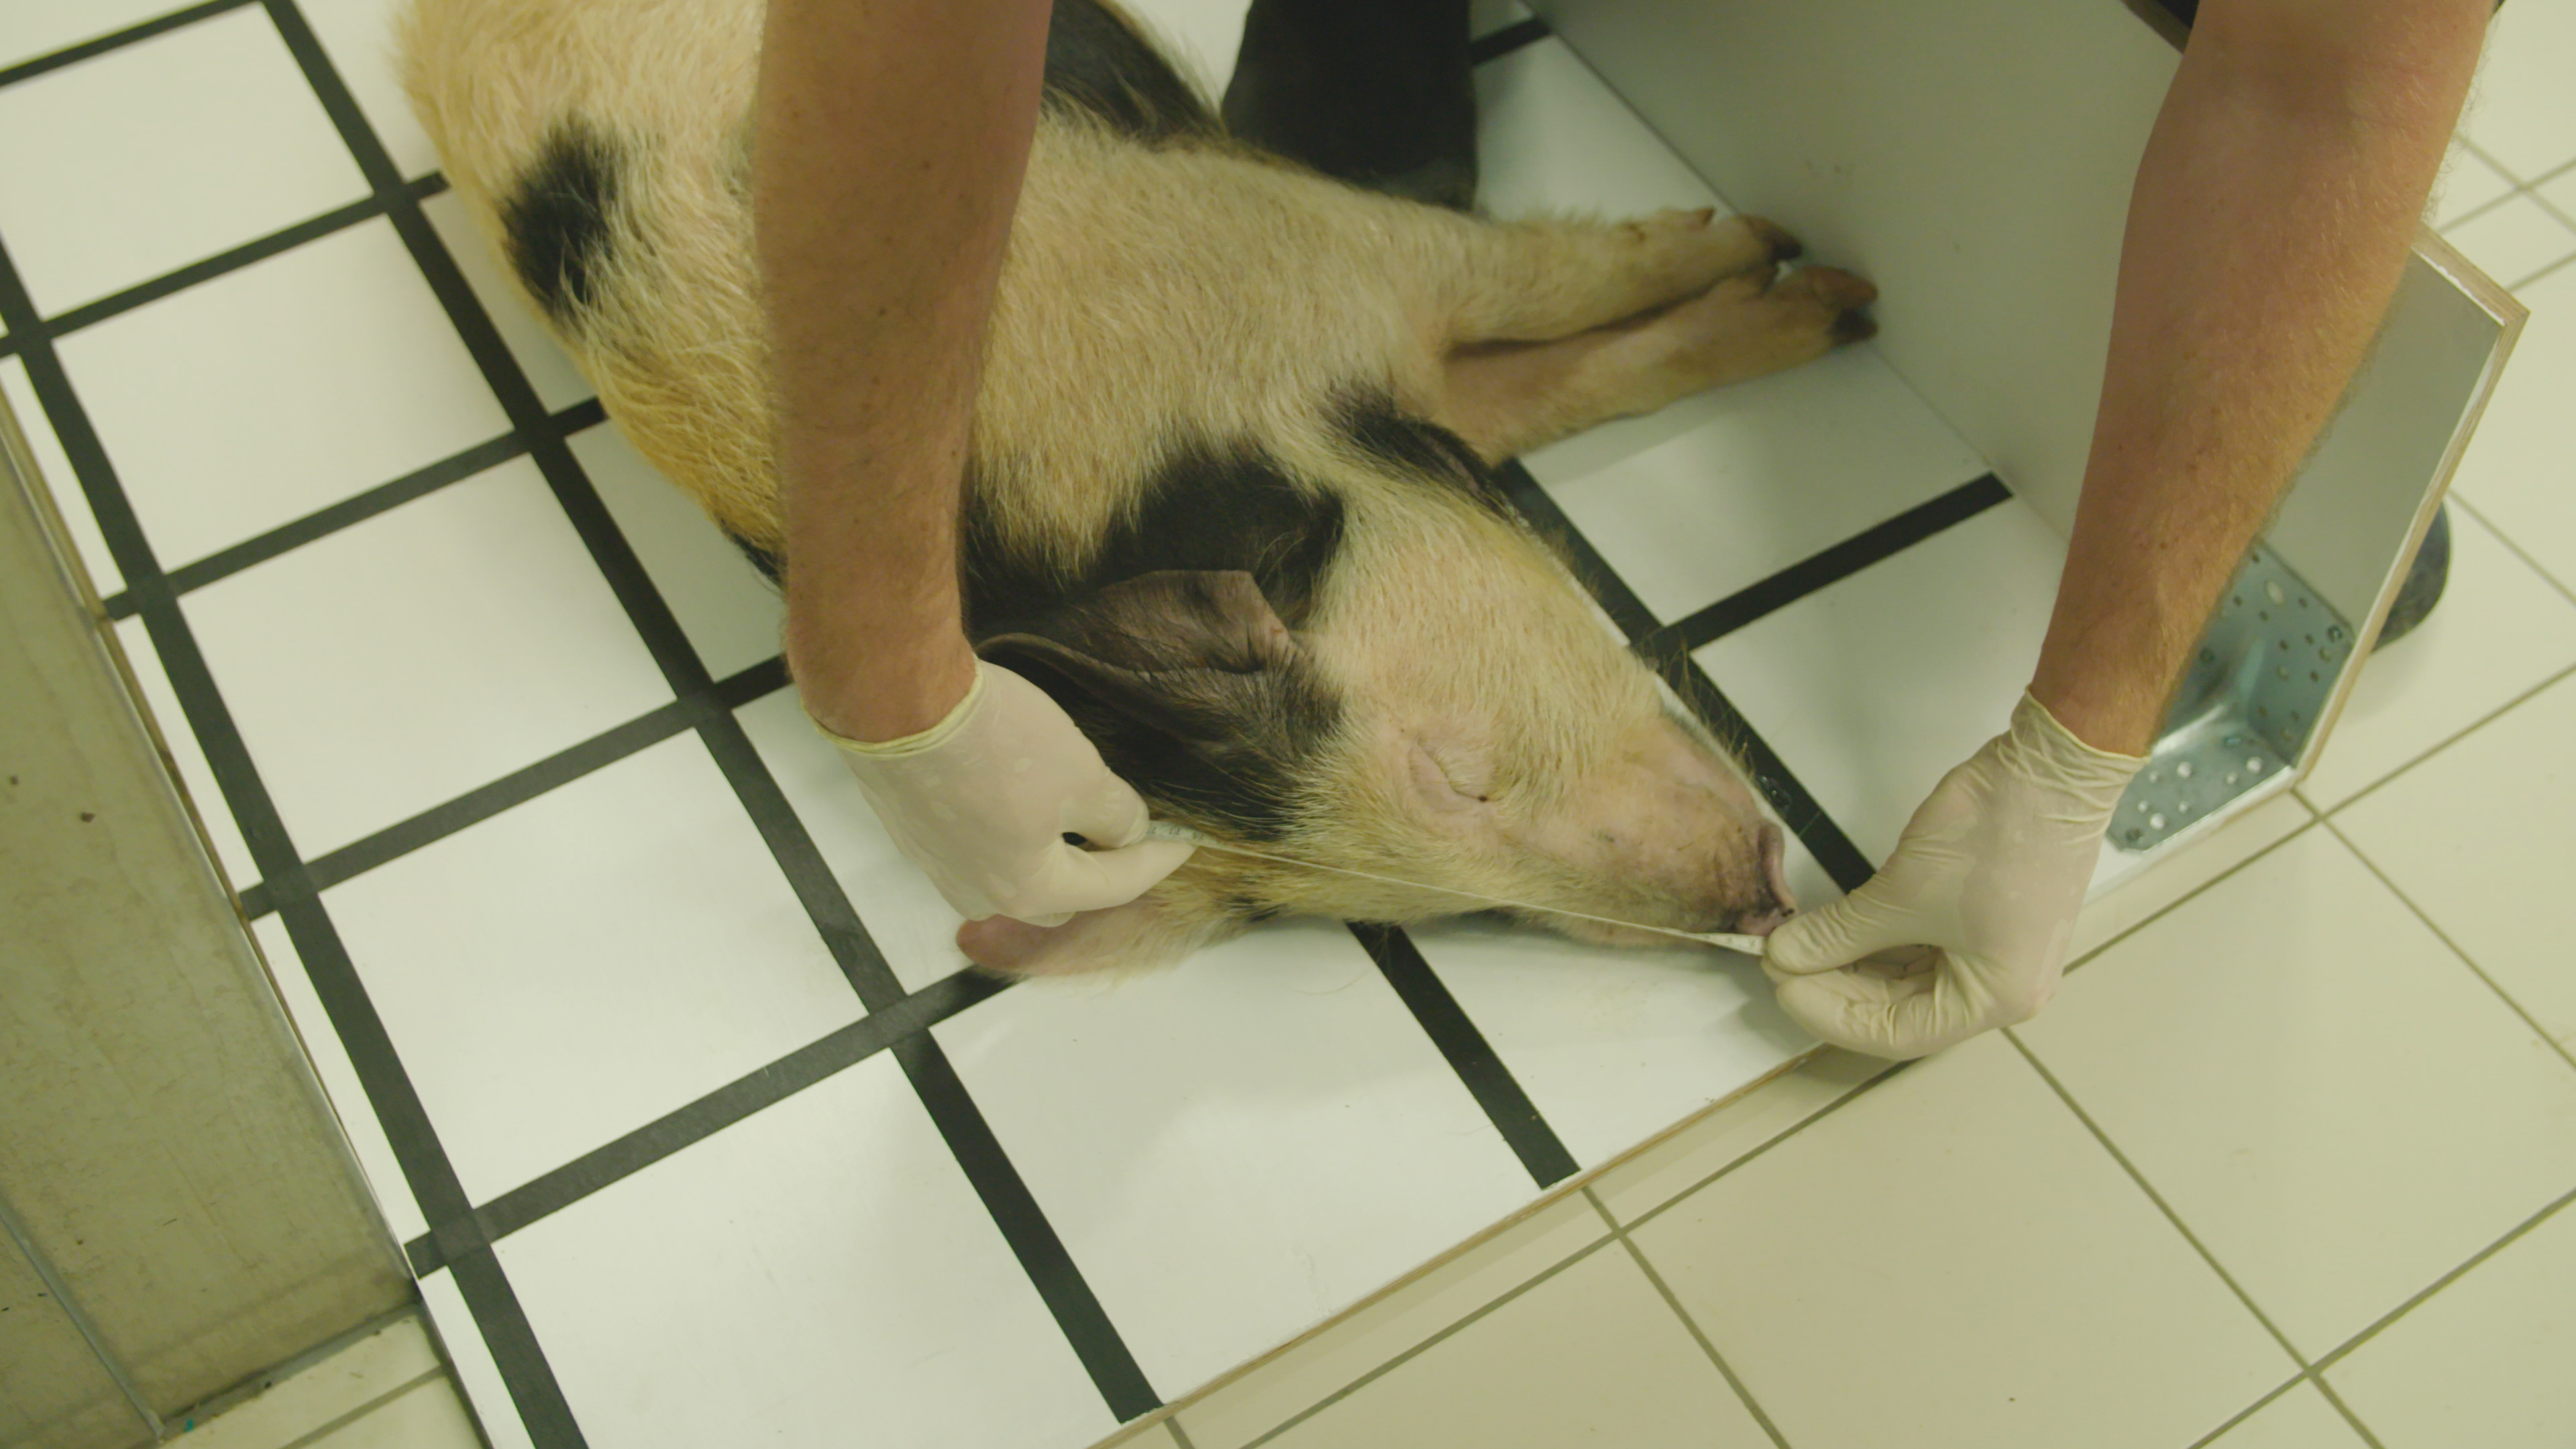 Gloved hands measuring an unconscious pig's head on the floor.